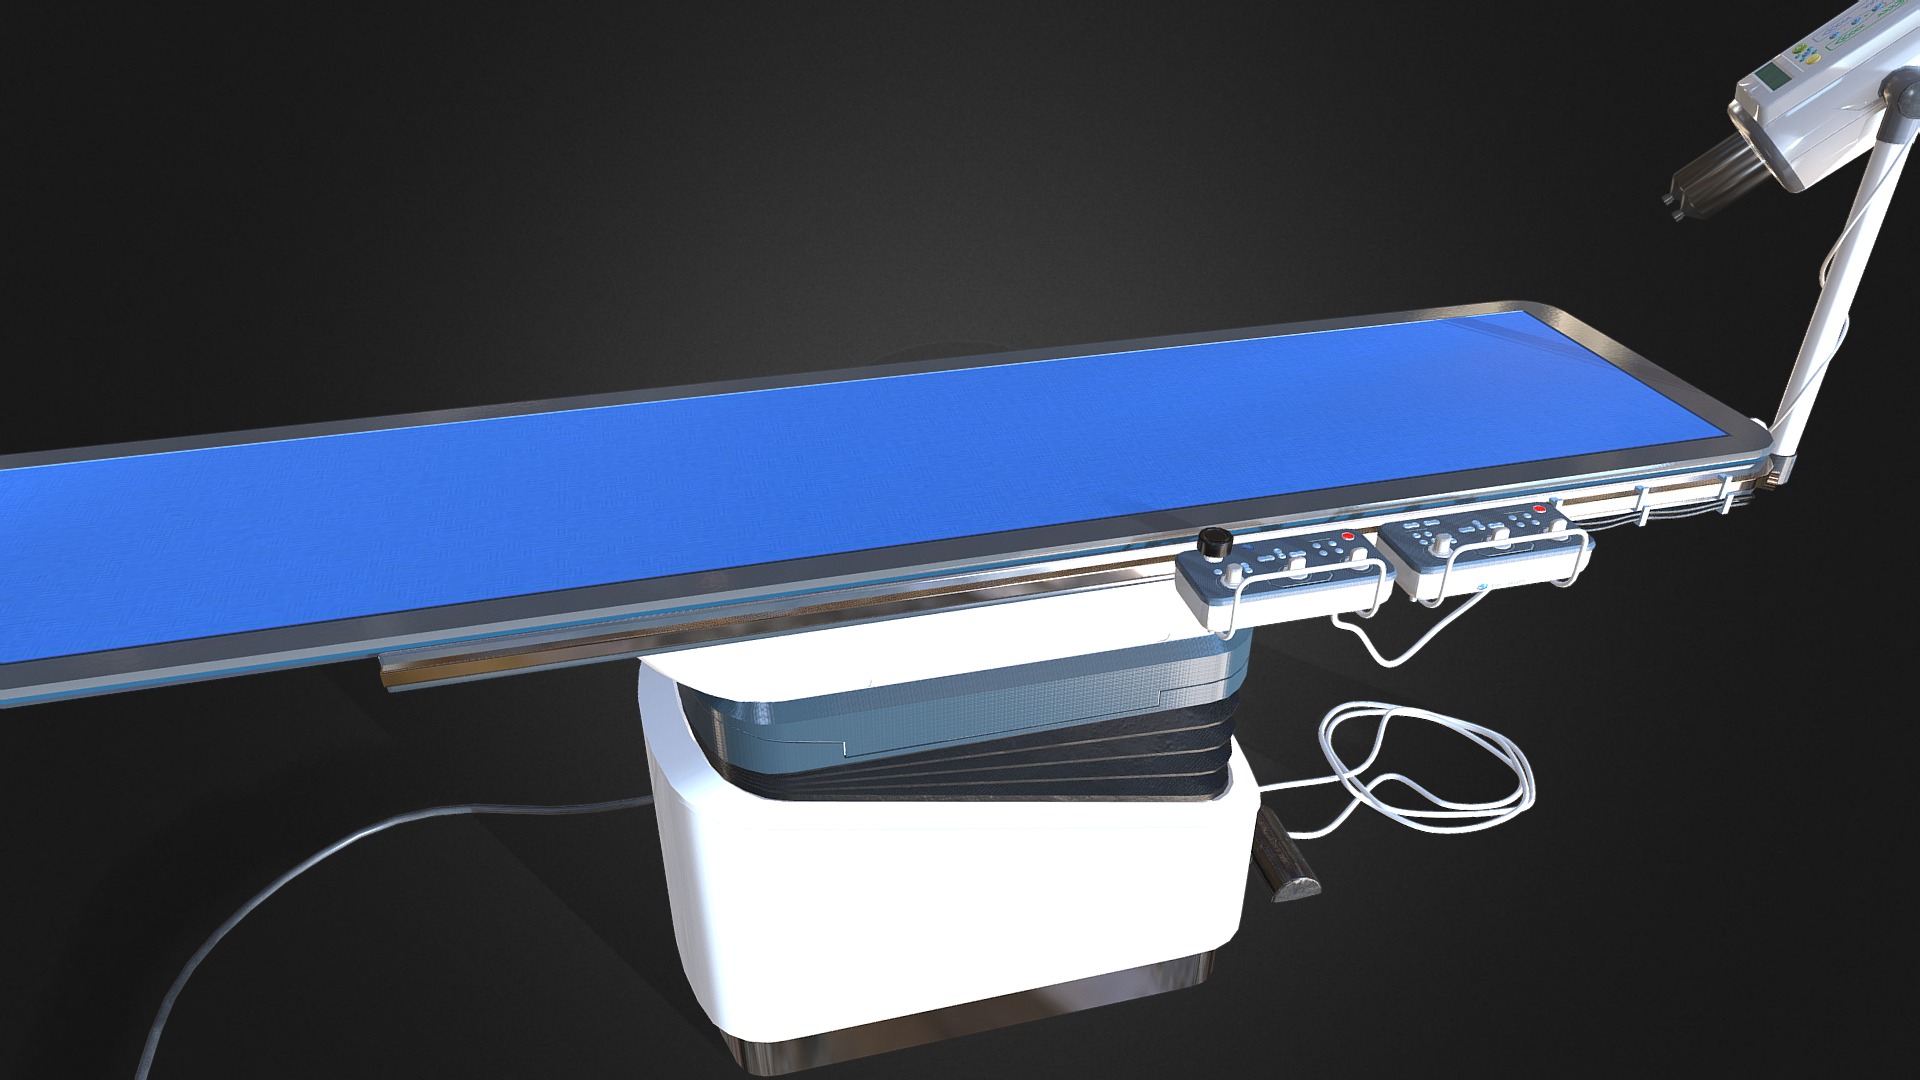 3D model Or_Table - This is a 3D model of the Or_Table. The 3D model is about a blue and white box with a wire attached to it.